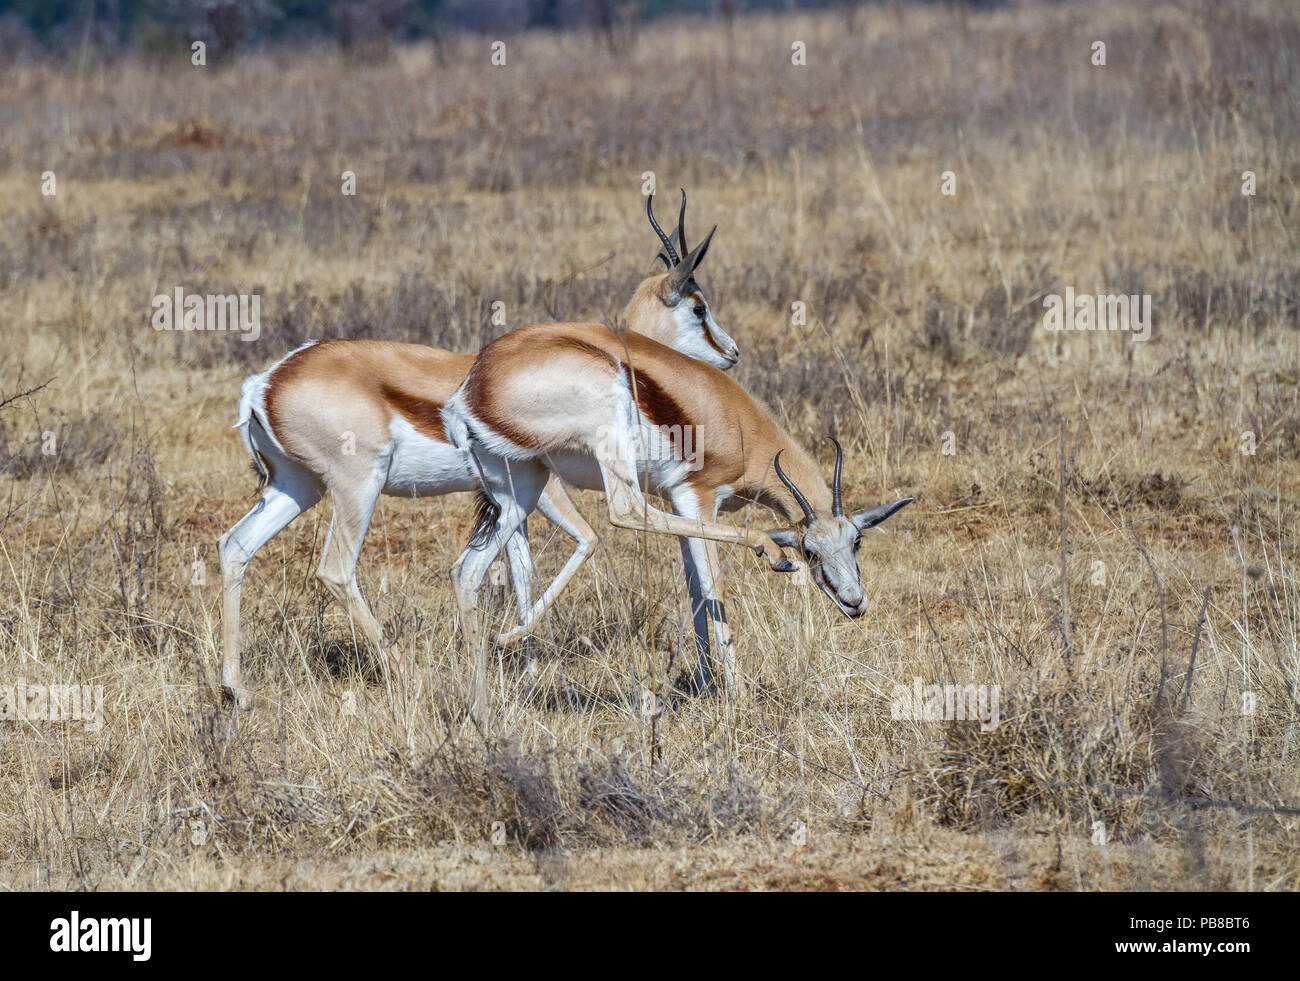 The springbok is a medium-sized antelope found mainly in southern and southwestern Africa image in landscape format with copy space Stock Photo